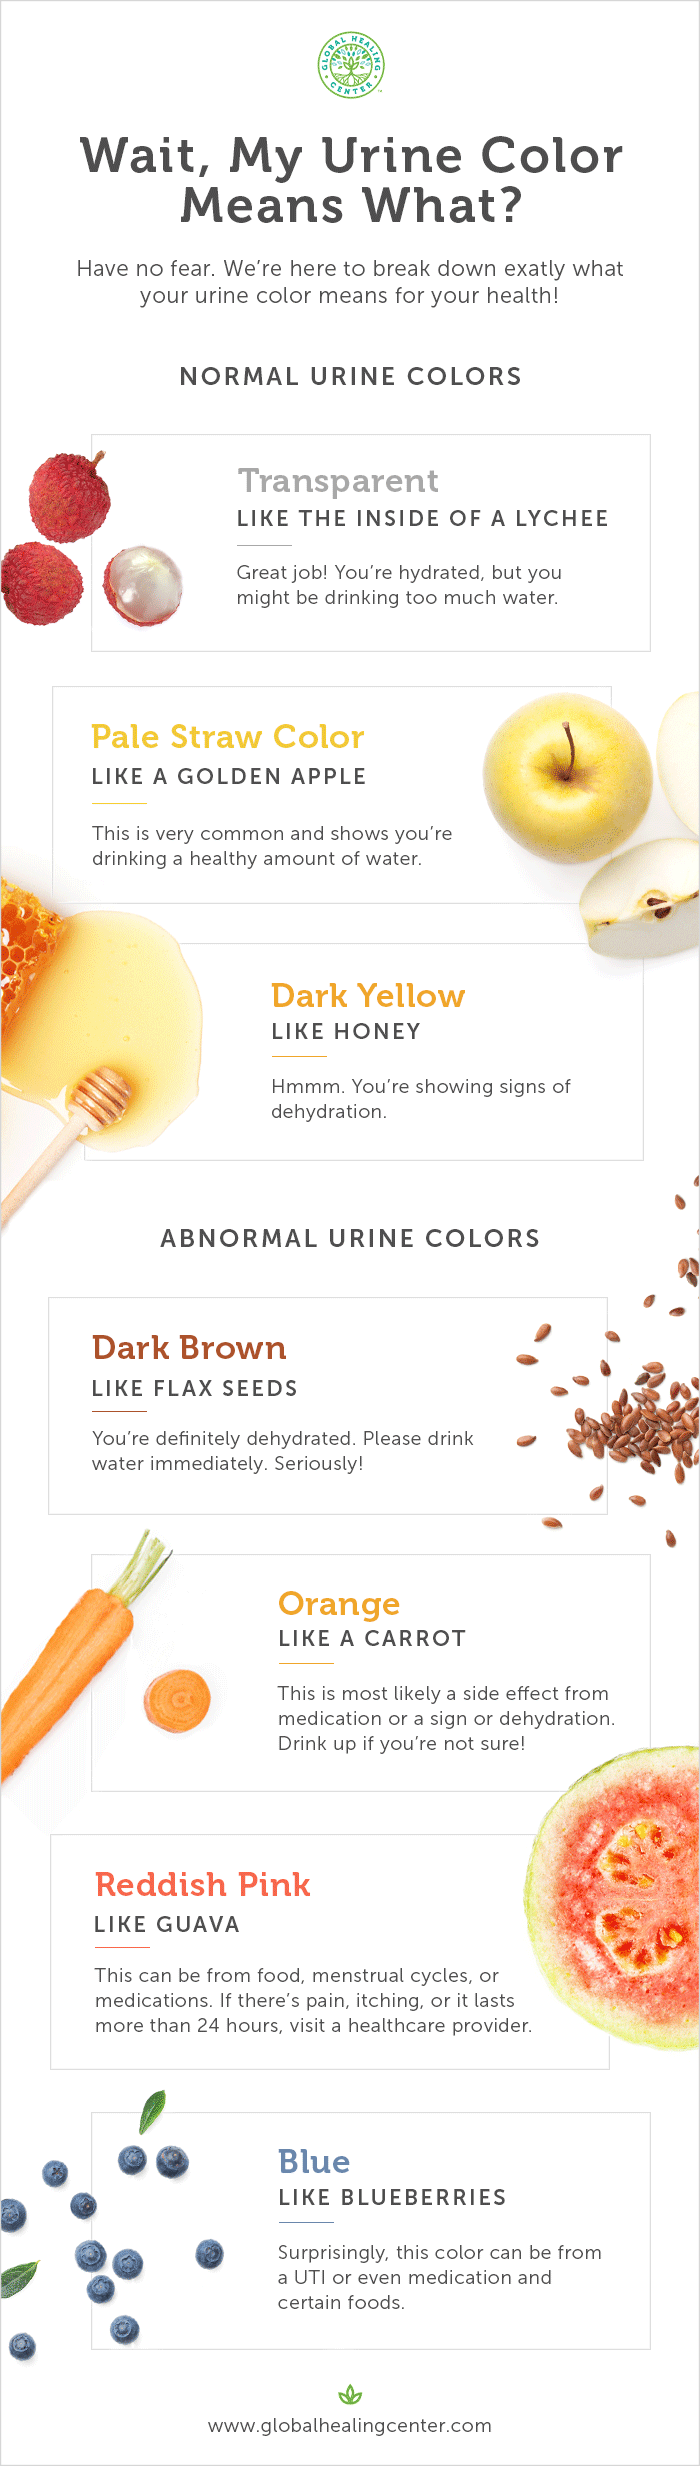 Wait, My Urine Color Means WHAT? 7 Colors Explained